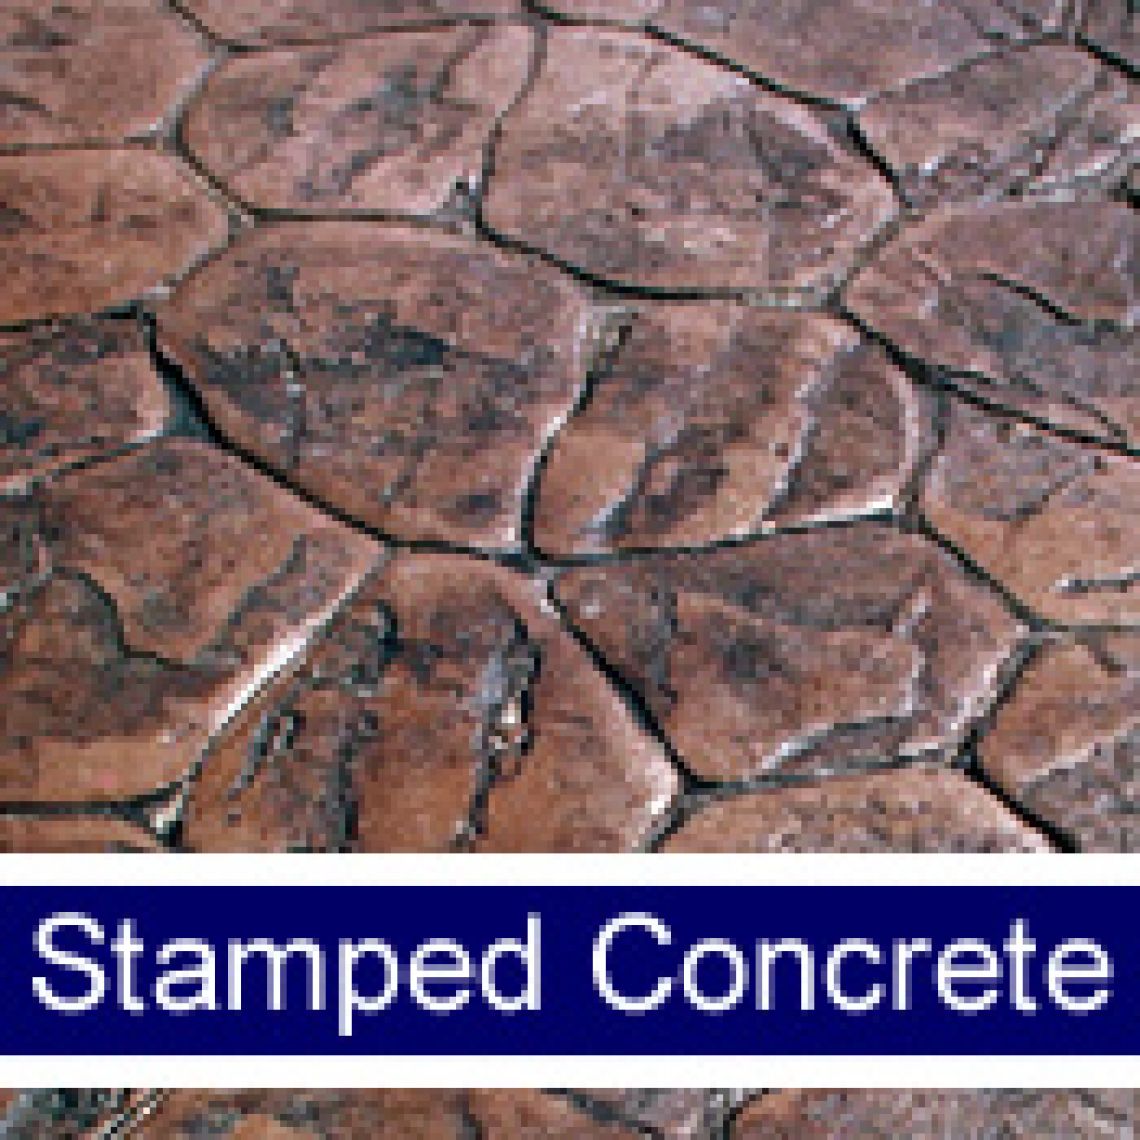 Avail Stamped Concrete Schenectady NY services For Transforming The Look of Your Home